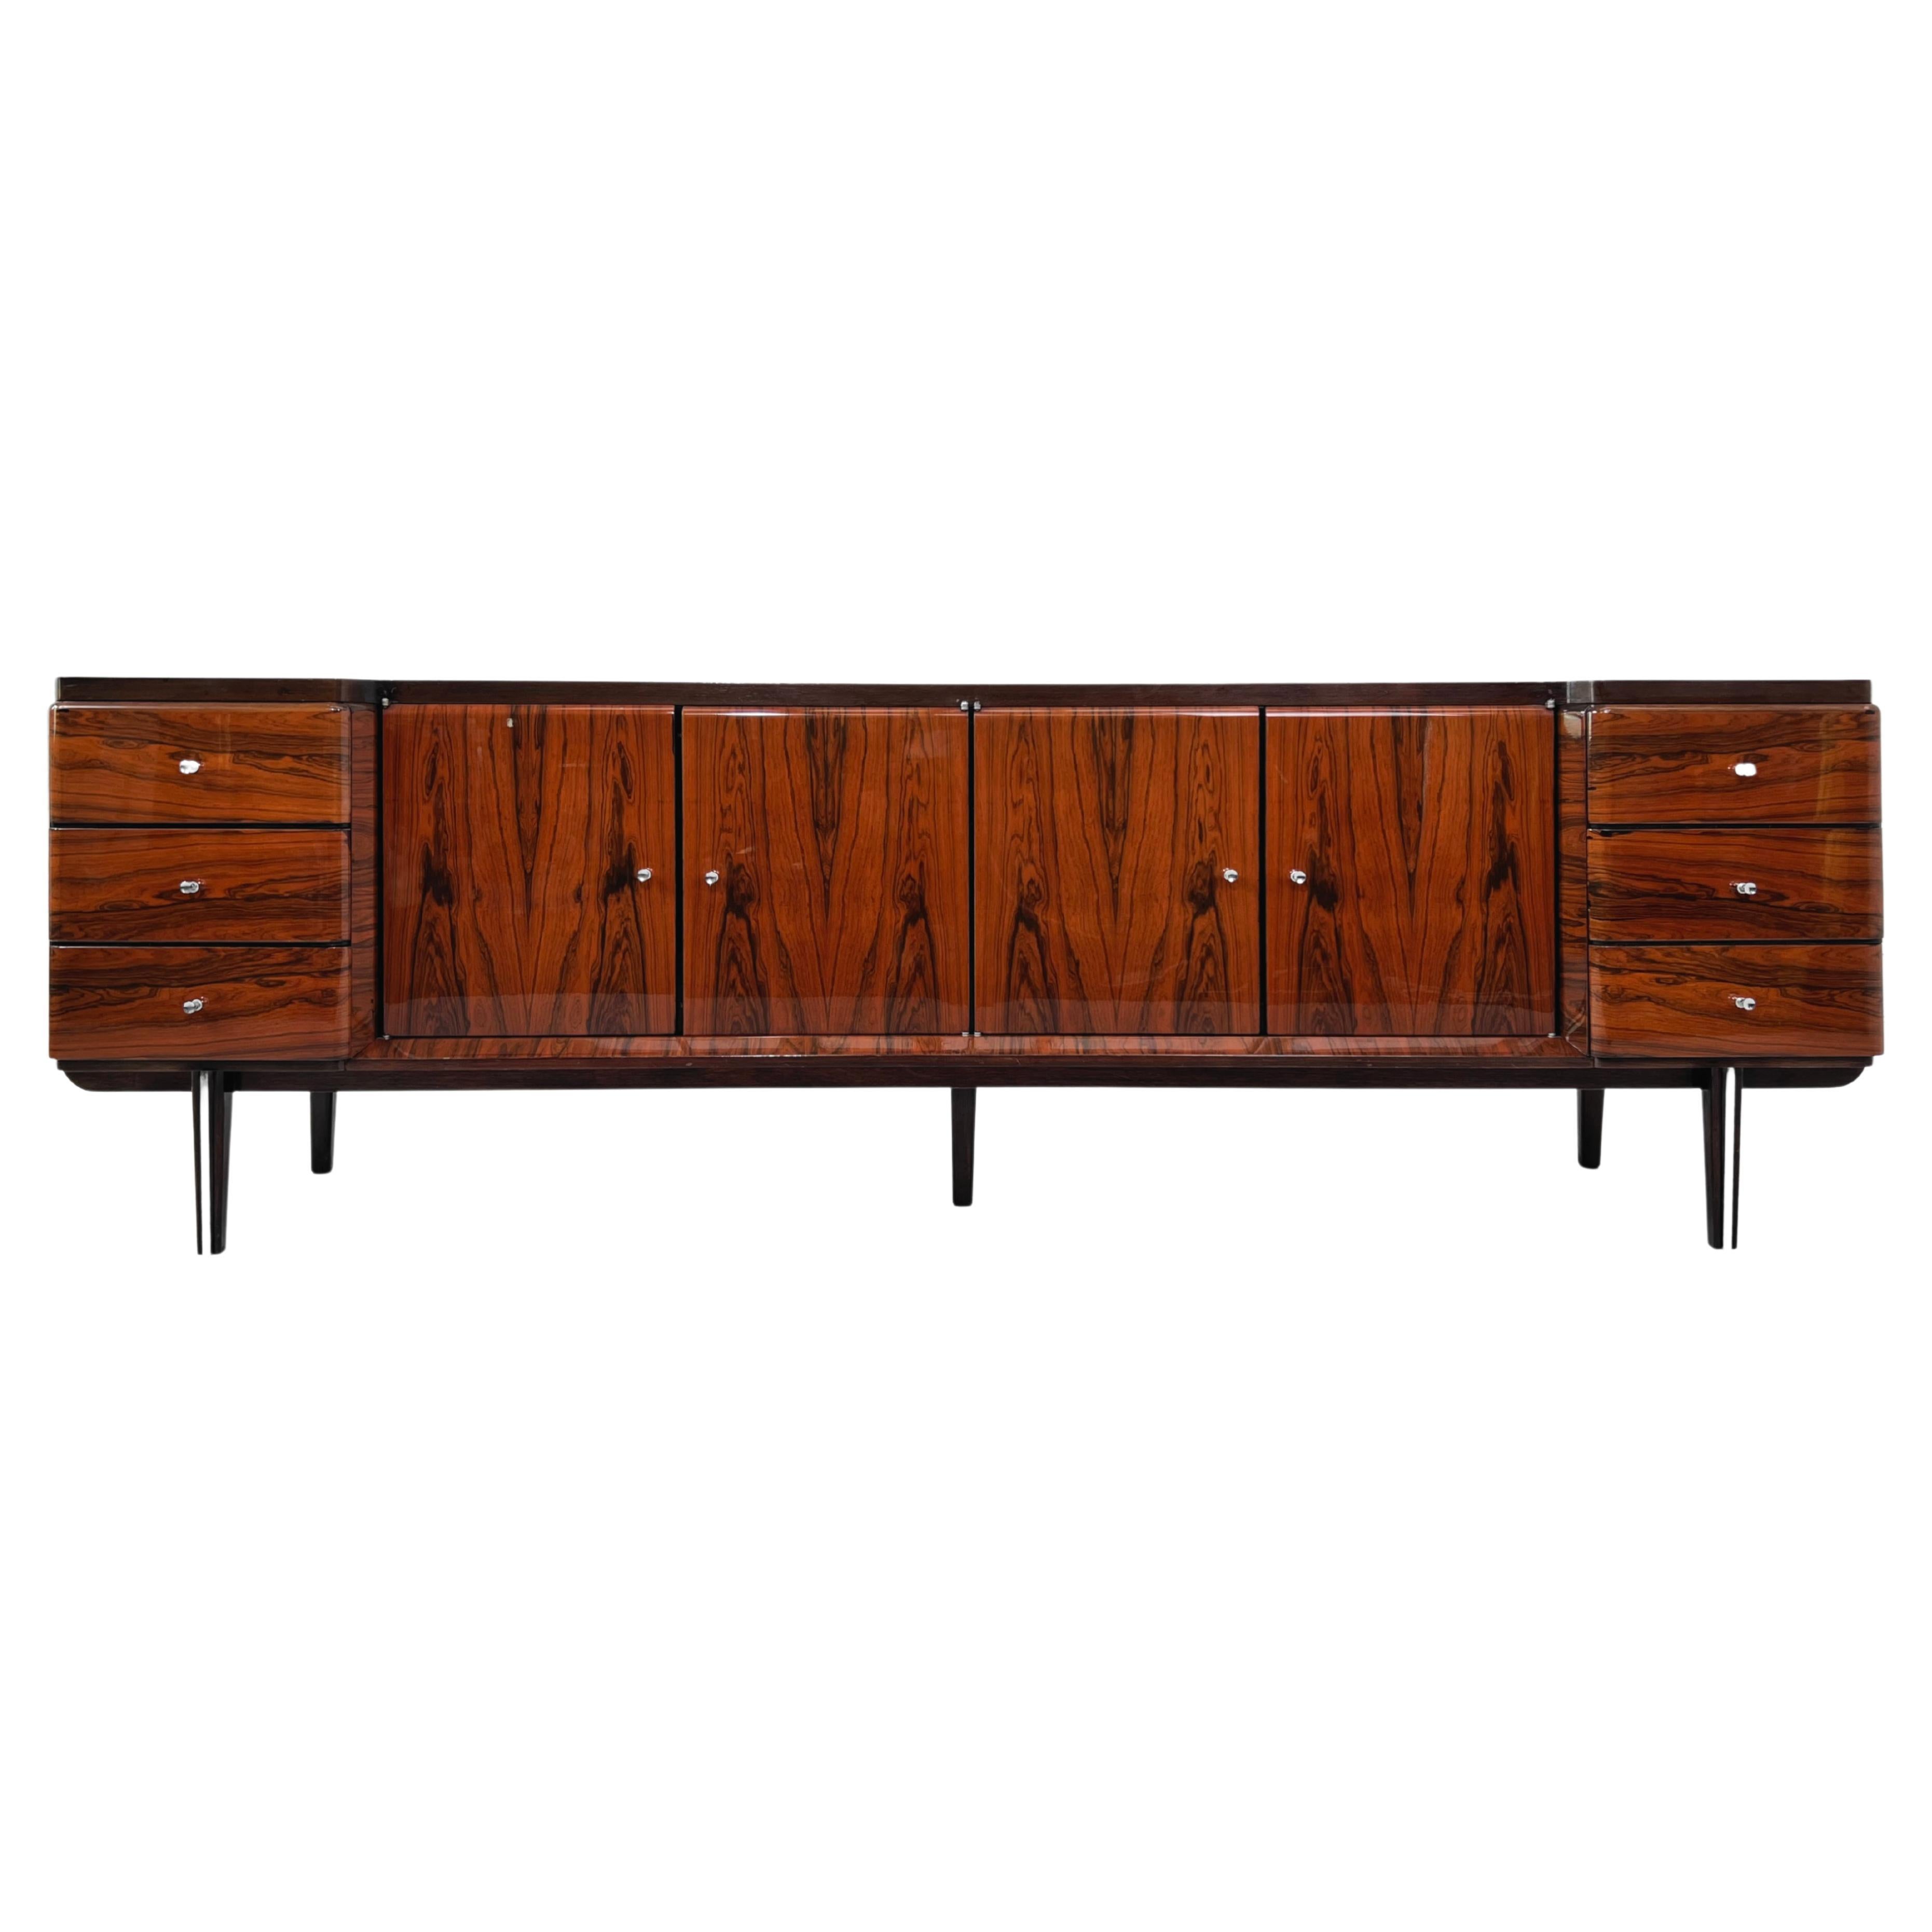 1950 -1960s Italian Design Rosewood Glossy Finishes Curved Sideboard 